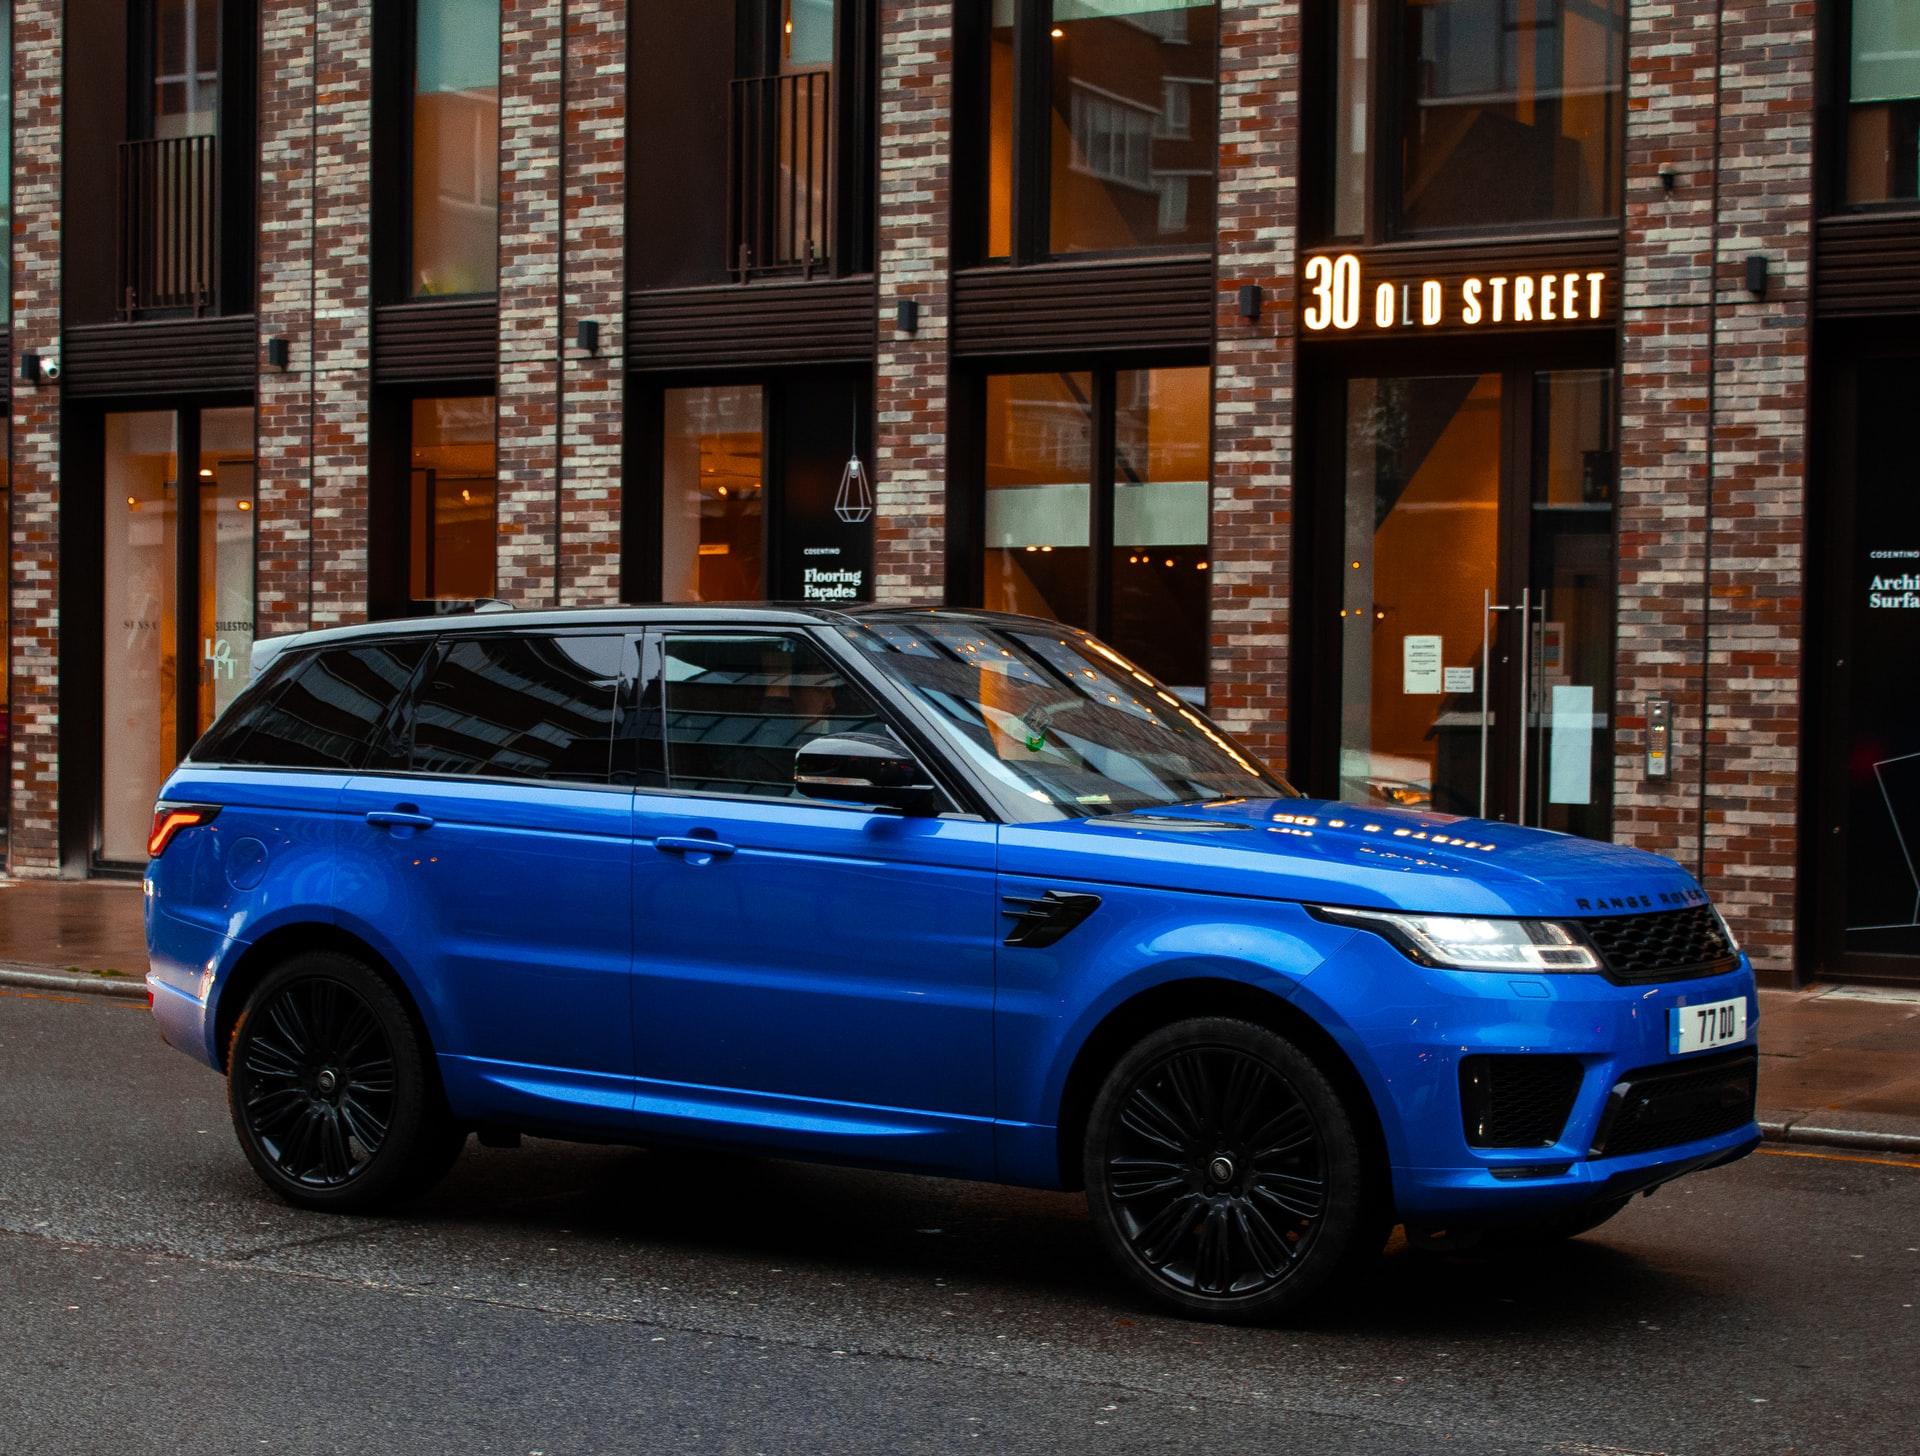 If you are looking for power, look towards the Range Rover Sport. 